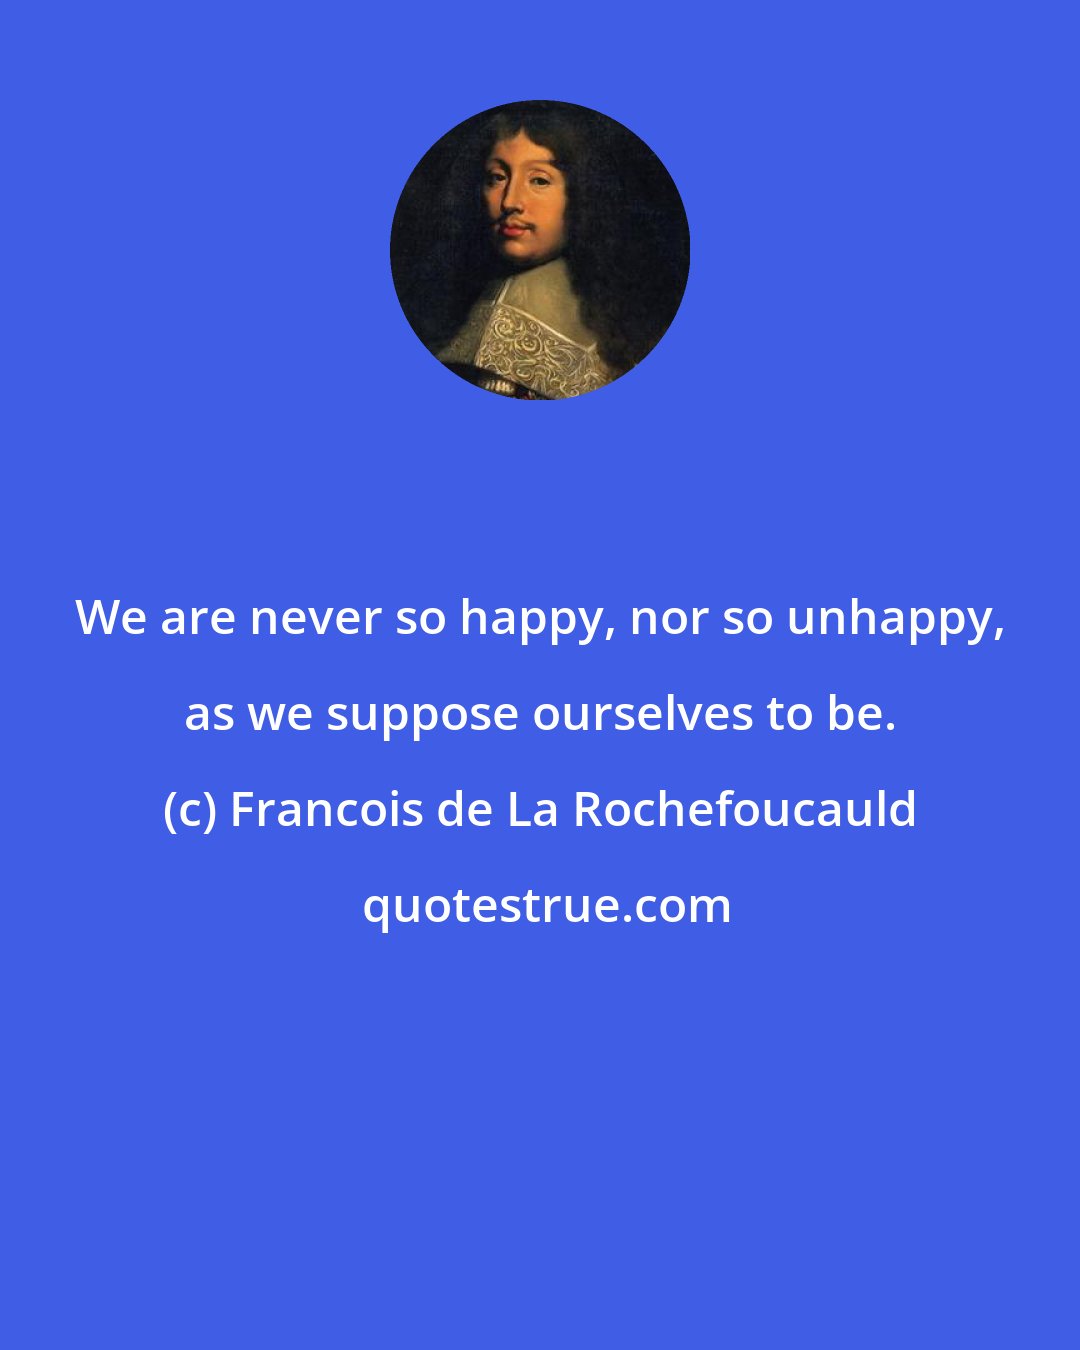 Francois de La Rochefoucauld: We are never so happy, nor so unhappy, as we suppose ourselves to be.